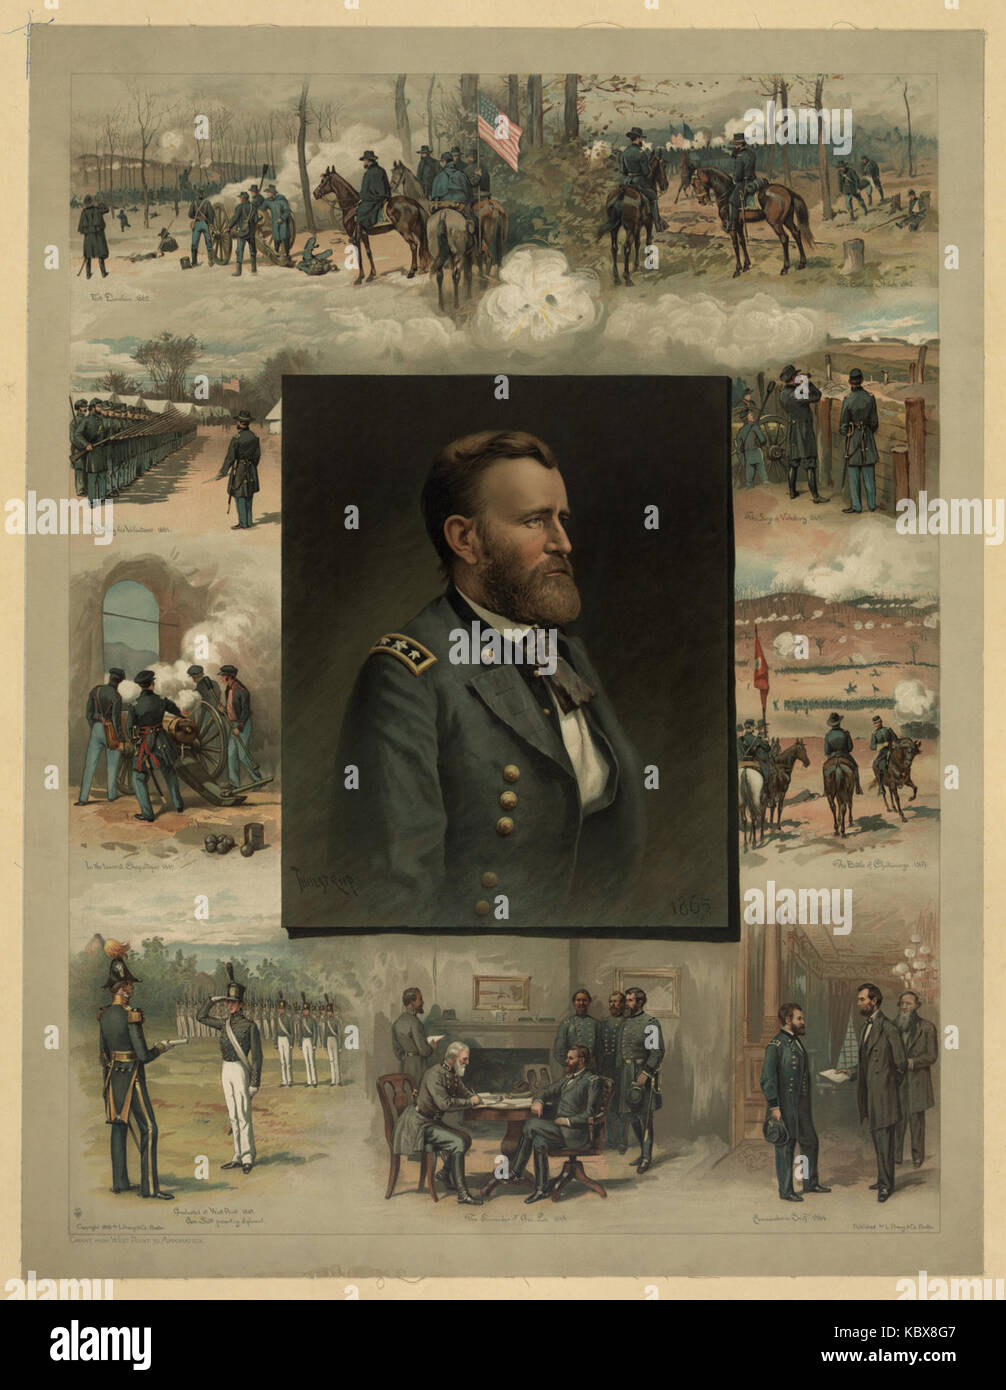 Ulysses S. Grant from West Point to Appomattox unrestored Stock Photo